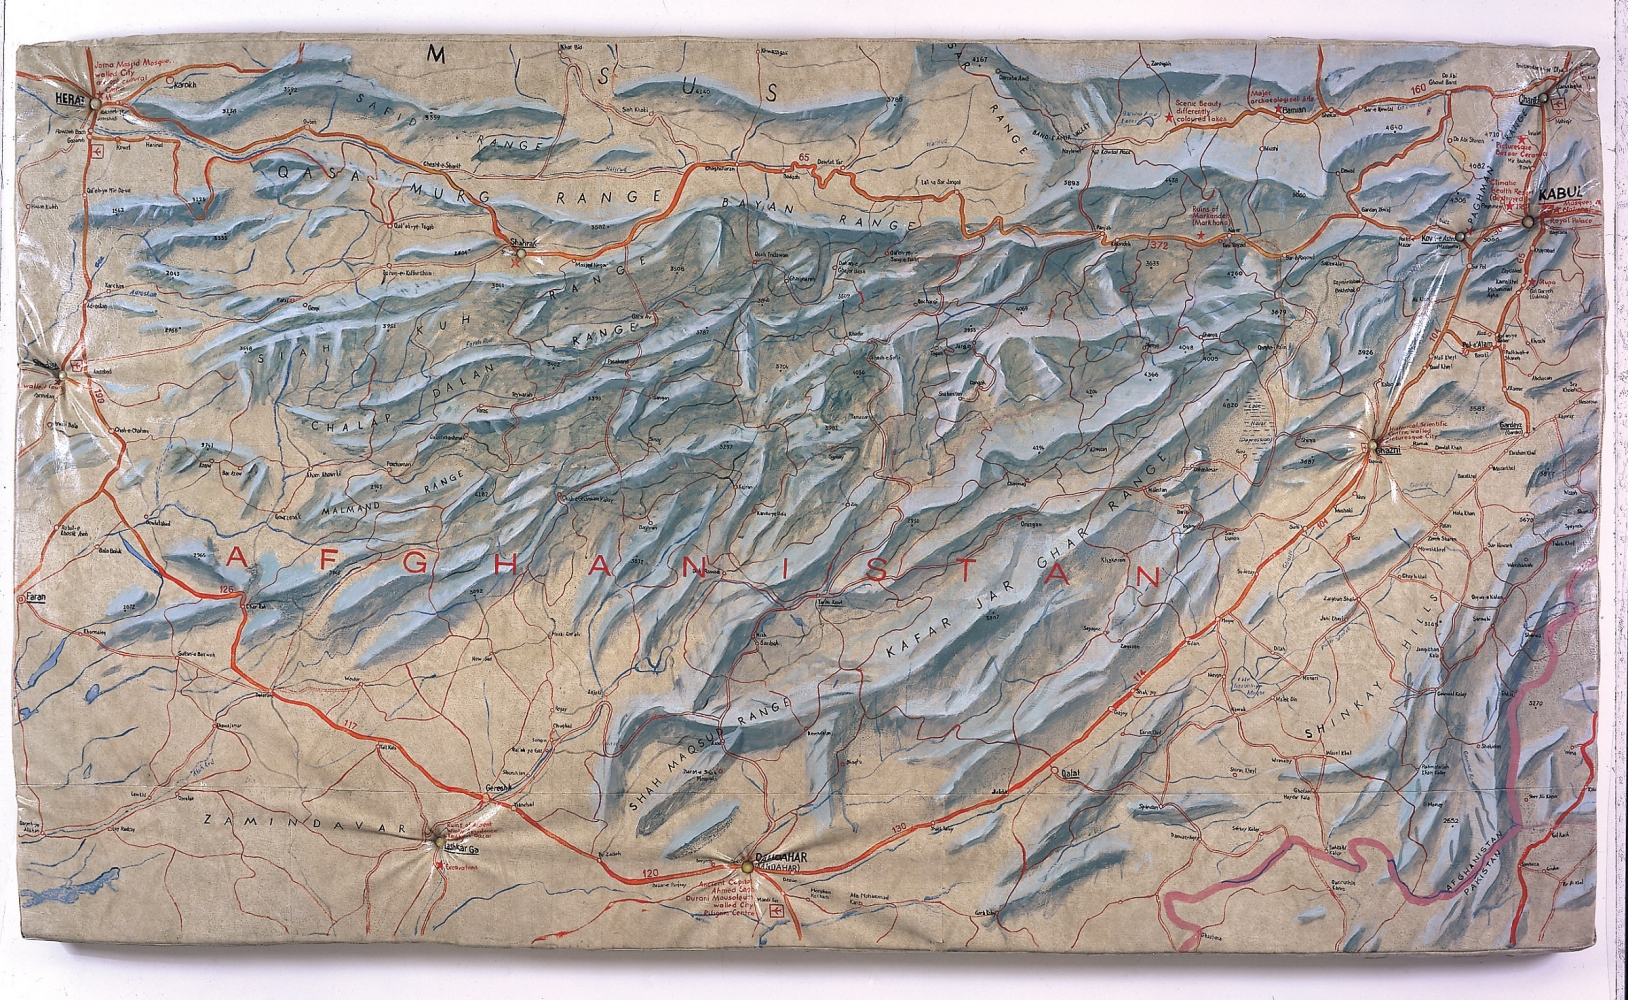 Guillermo Kuitca
Afghanistan, 1990
acyrlic on wood
67 x 118 inches (170 x 300 cm)
Collection of Daros-Latinamerica